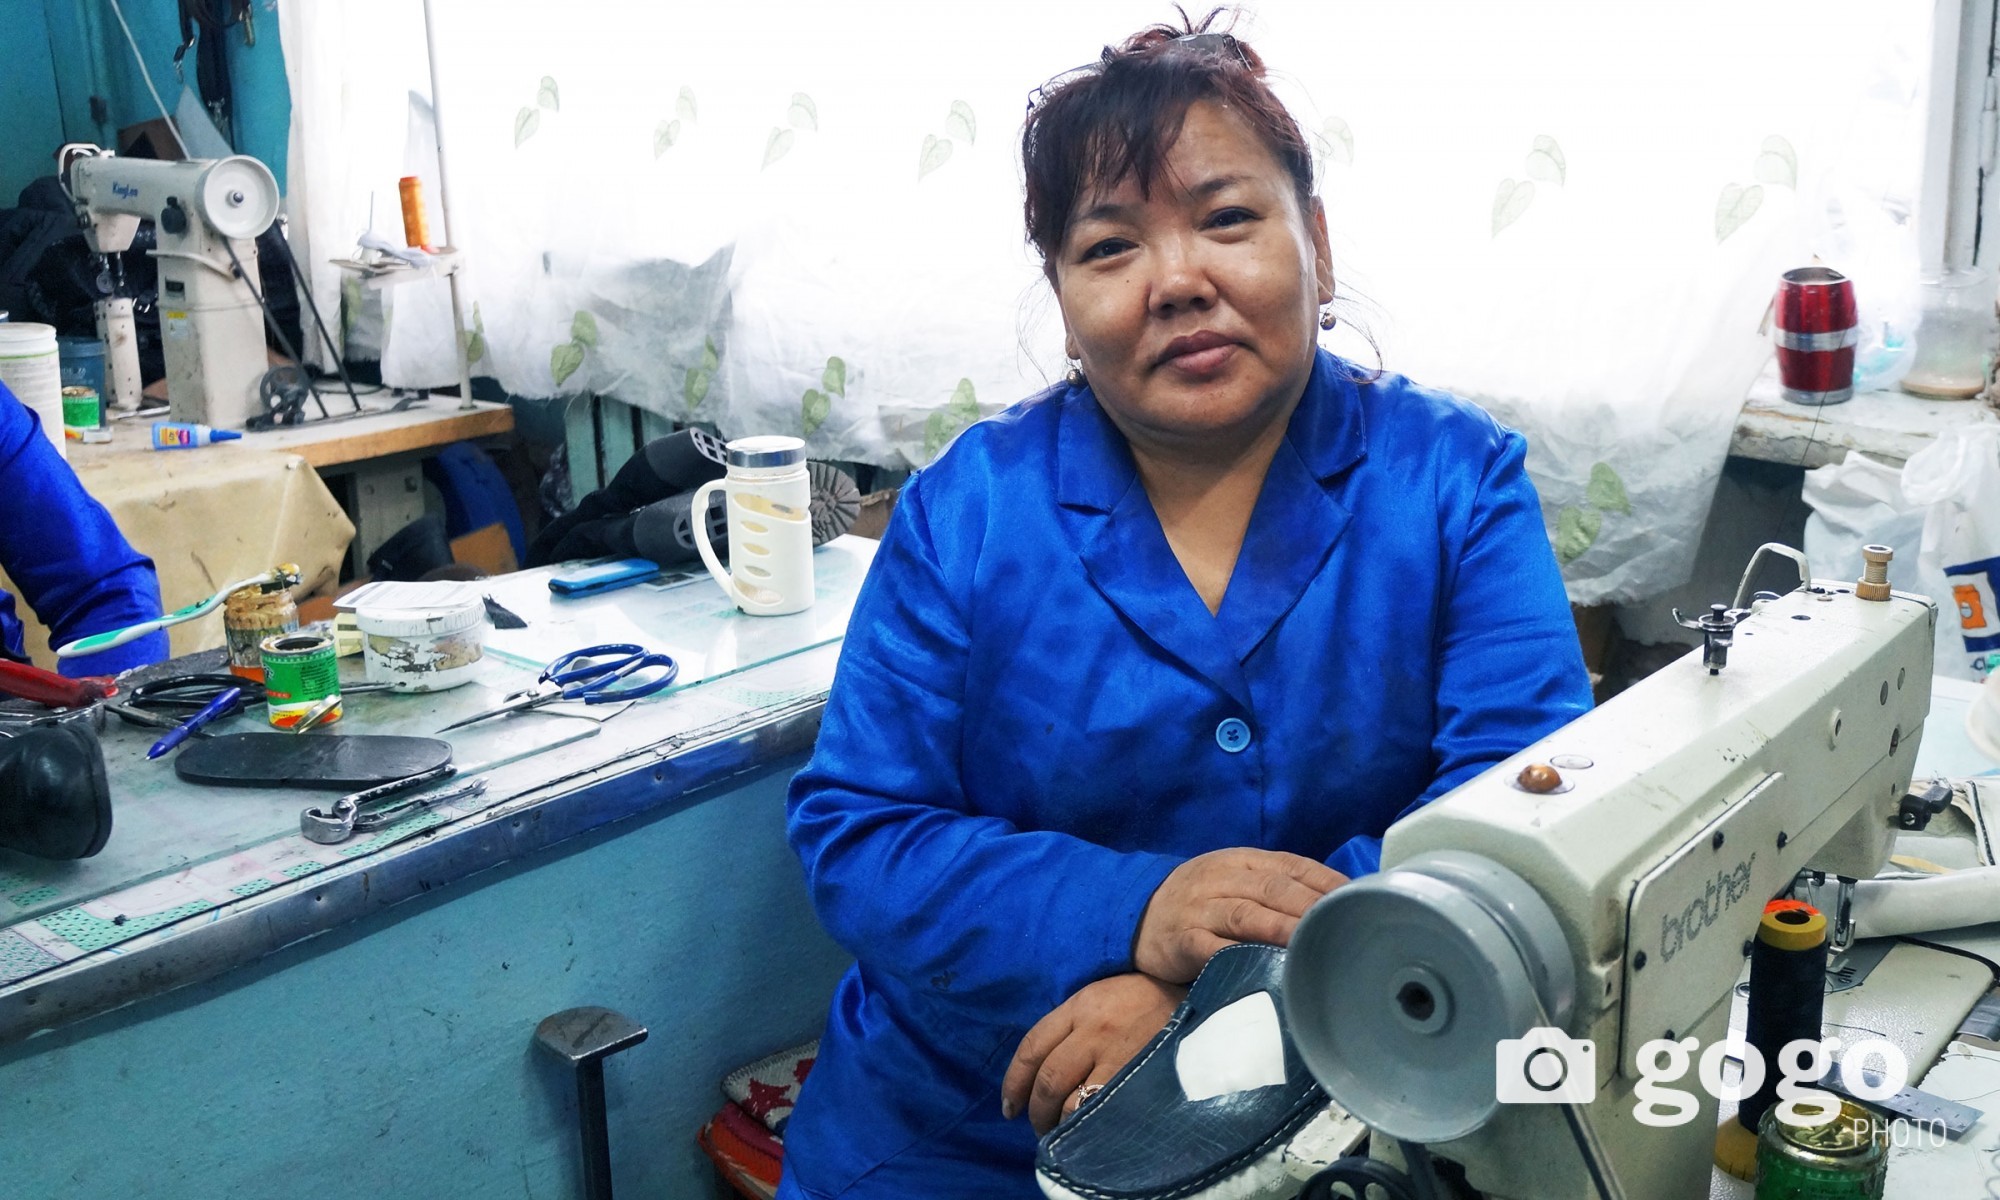 G.Enhzaya is a tailor. She wants all Mongolians to live peacefully and healthy.